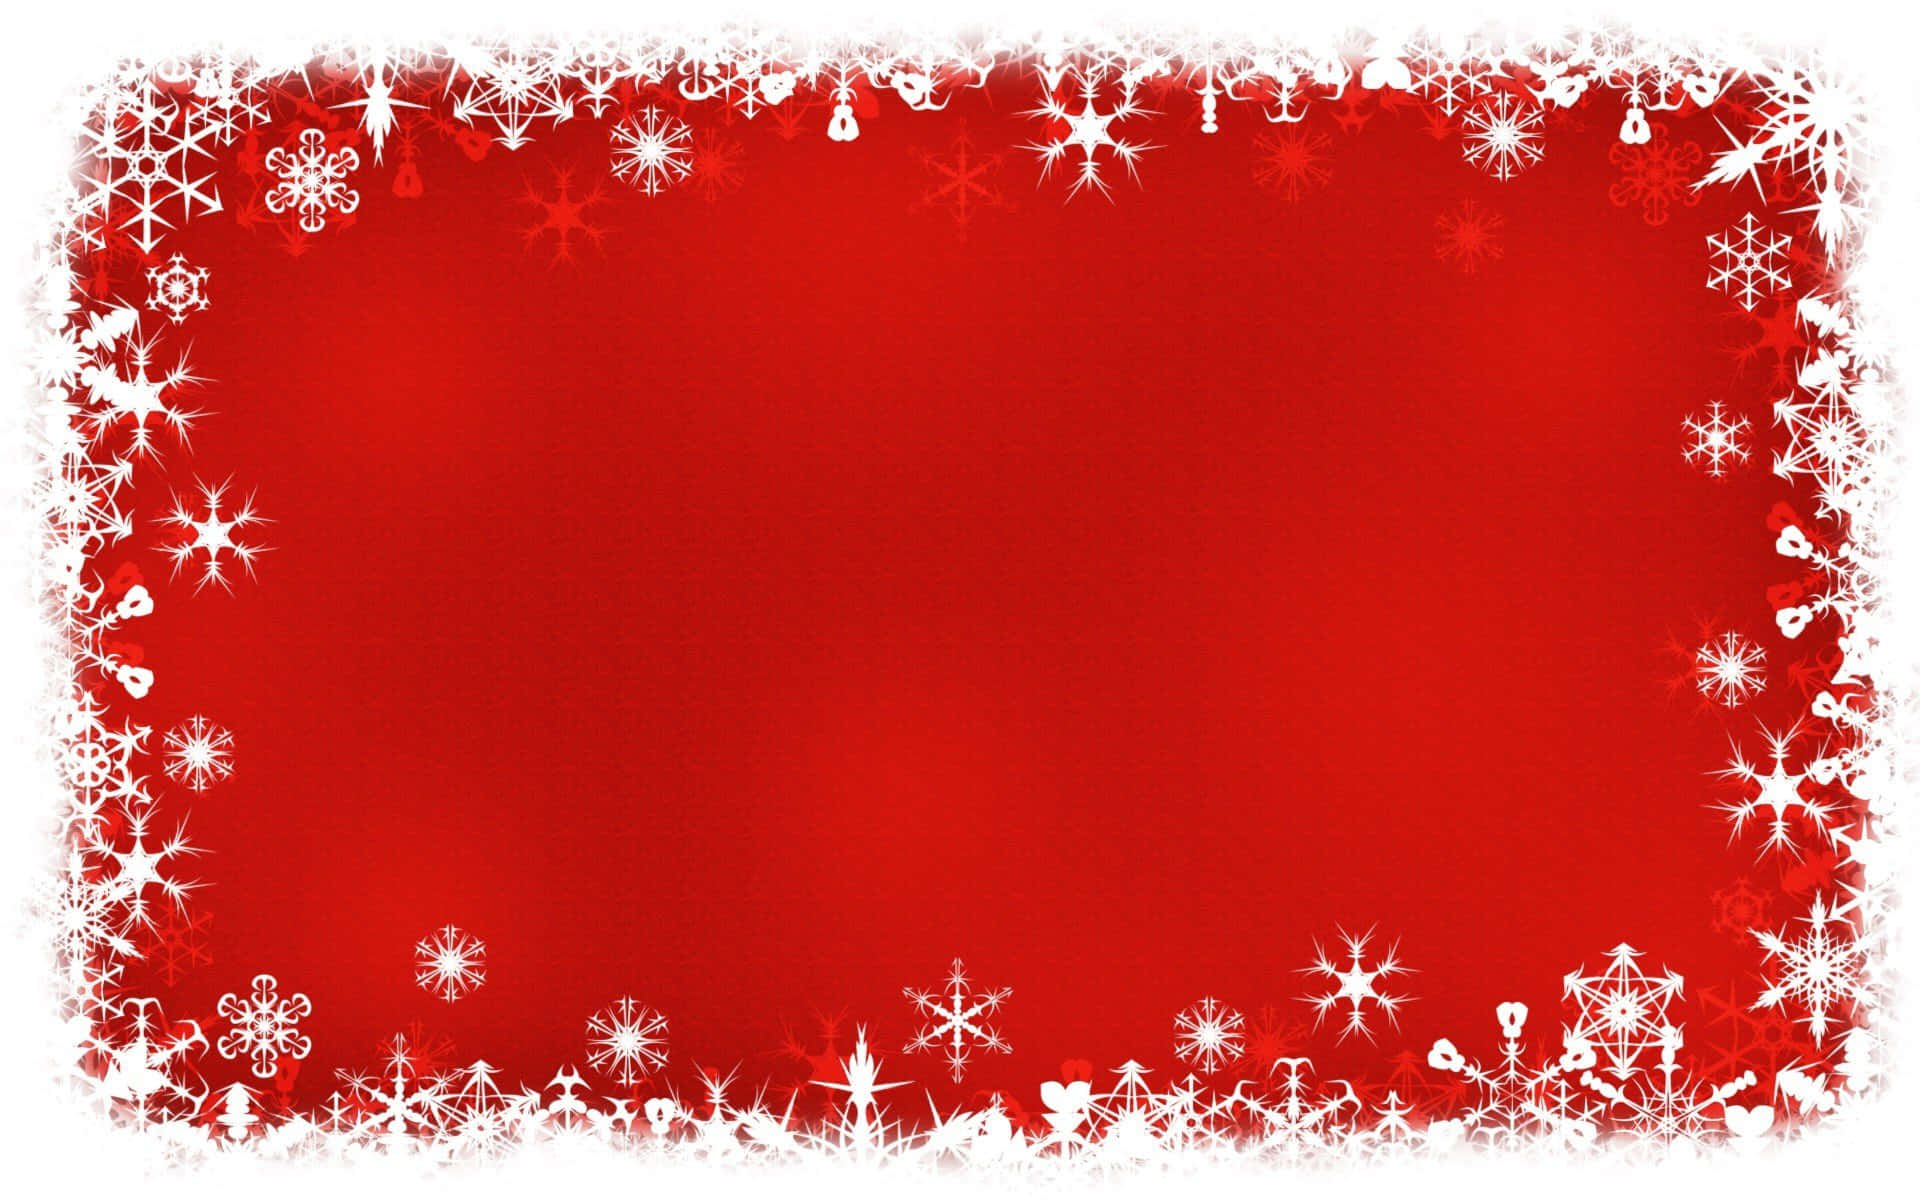 [100+] Christmas Powerpoint Backgrounds | Wallpapers.com